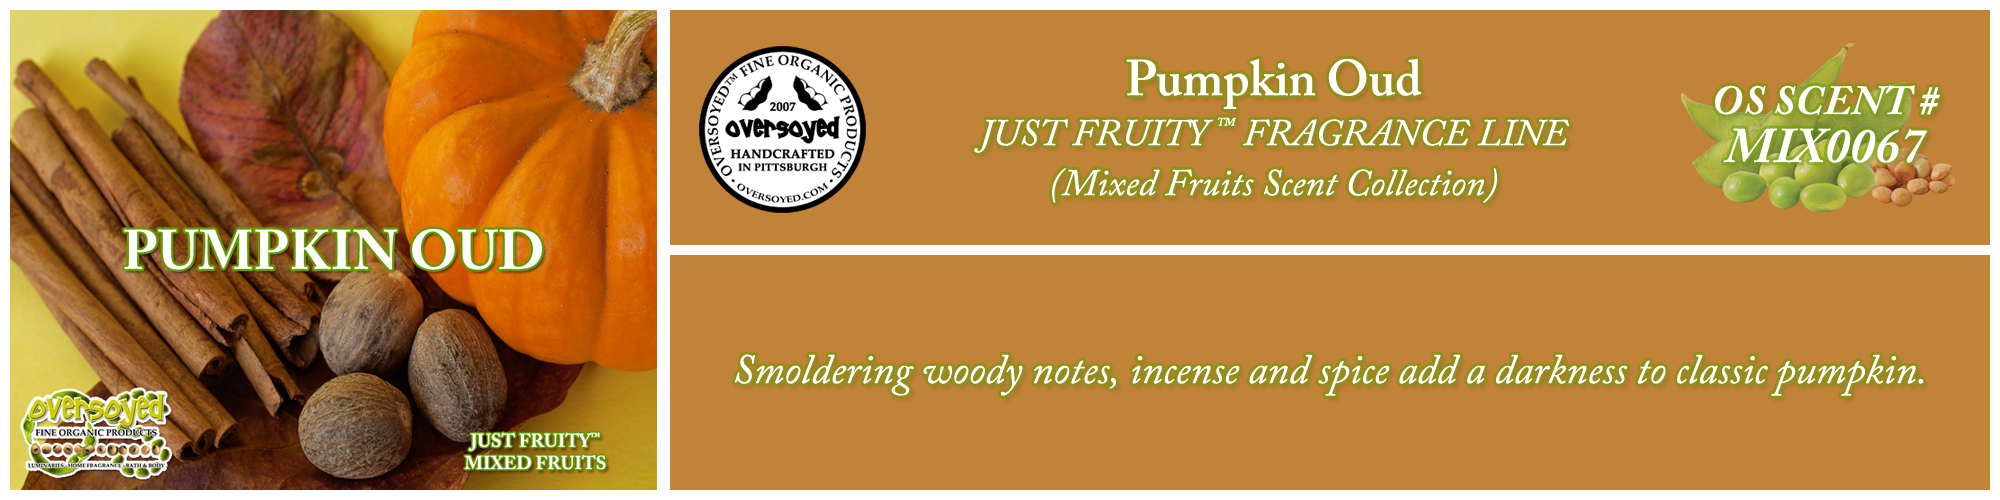 Pumpkin Oud Handcrafted Products Collection